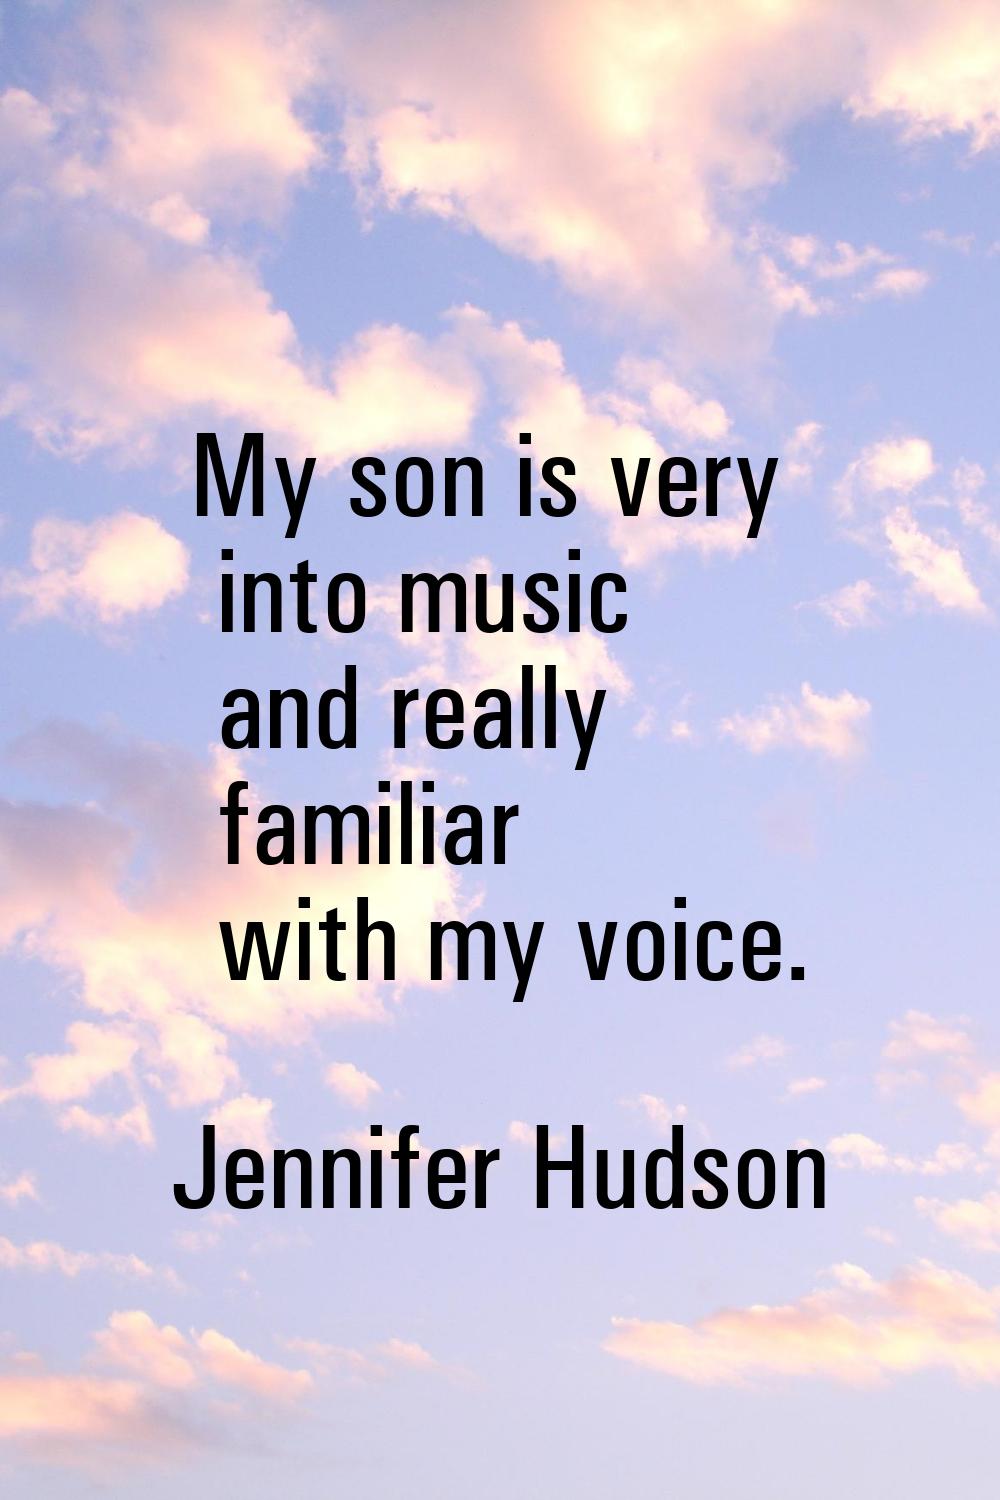 My son is very into music and really familiar with my voice.